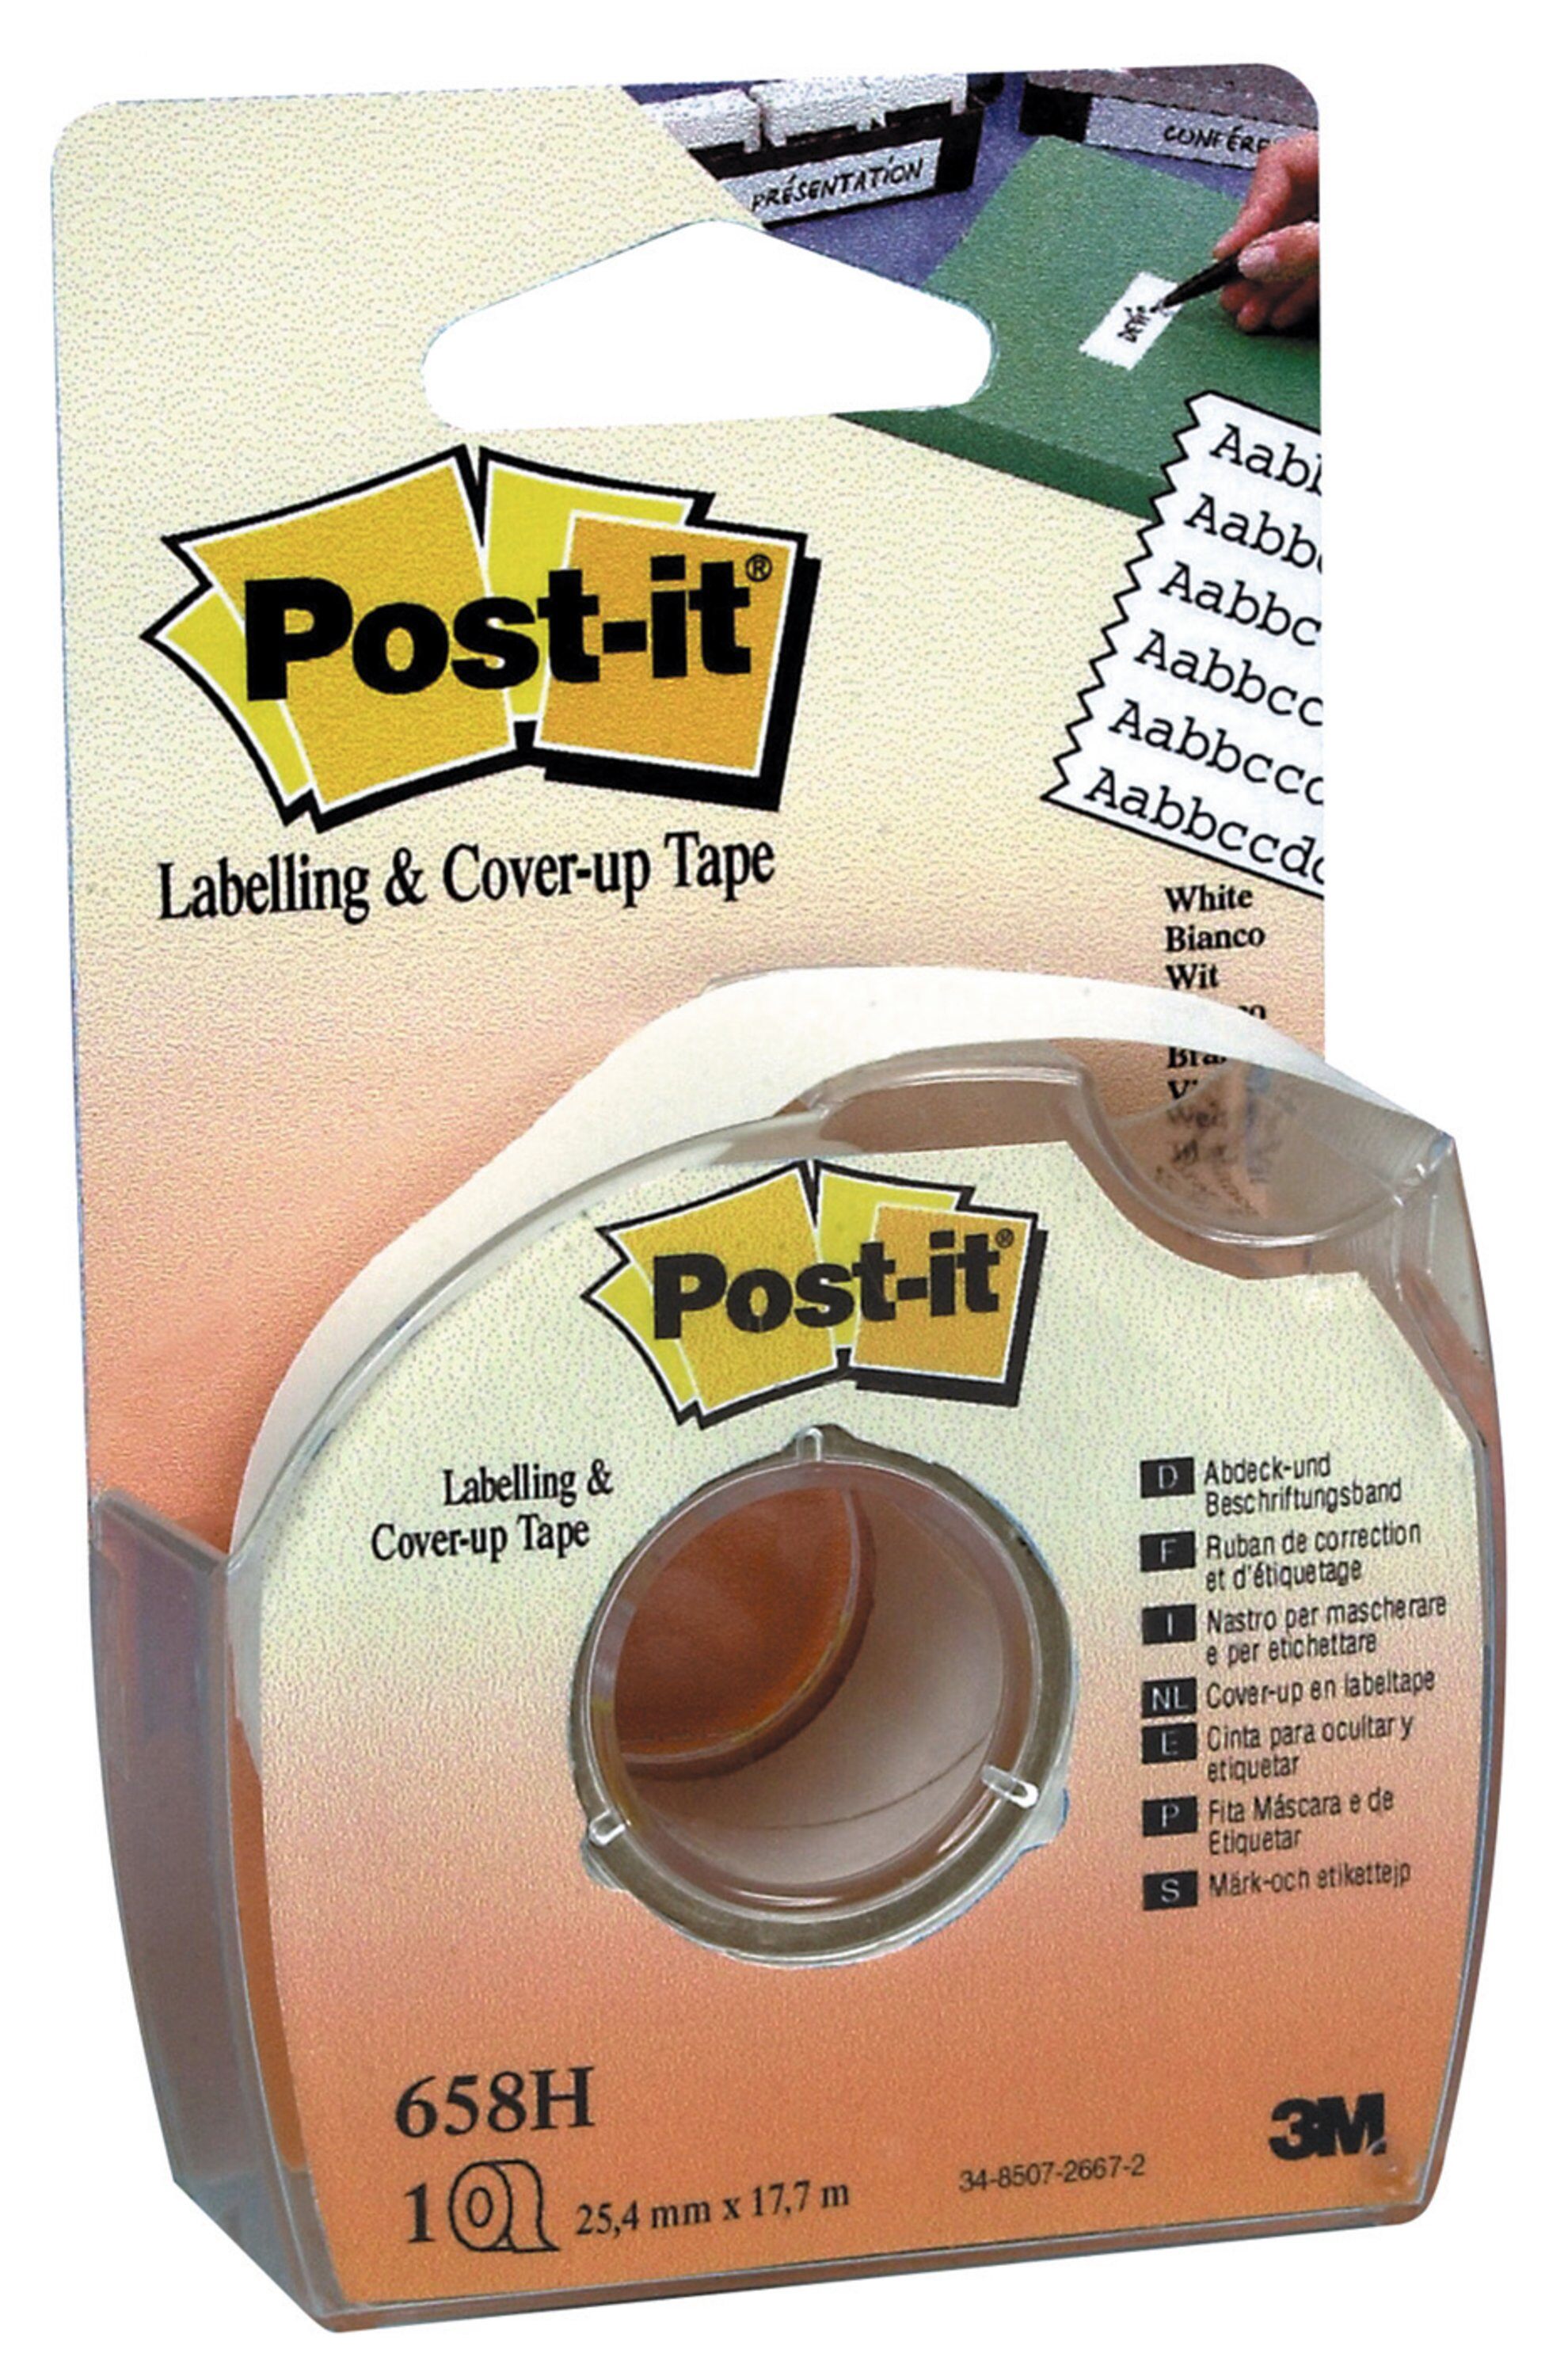 Correction Tape Post-it Cover-Up and Labelling Tape 25.4mmx17.7m White 658H